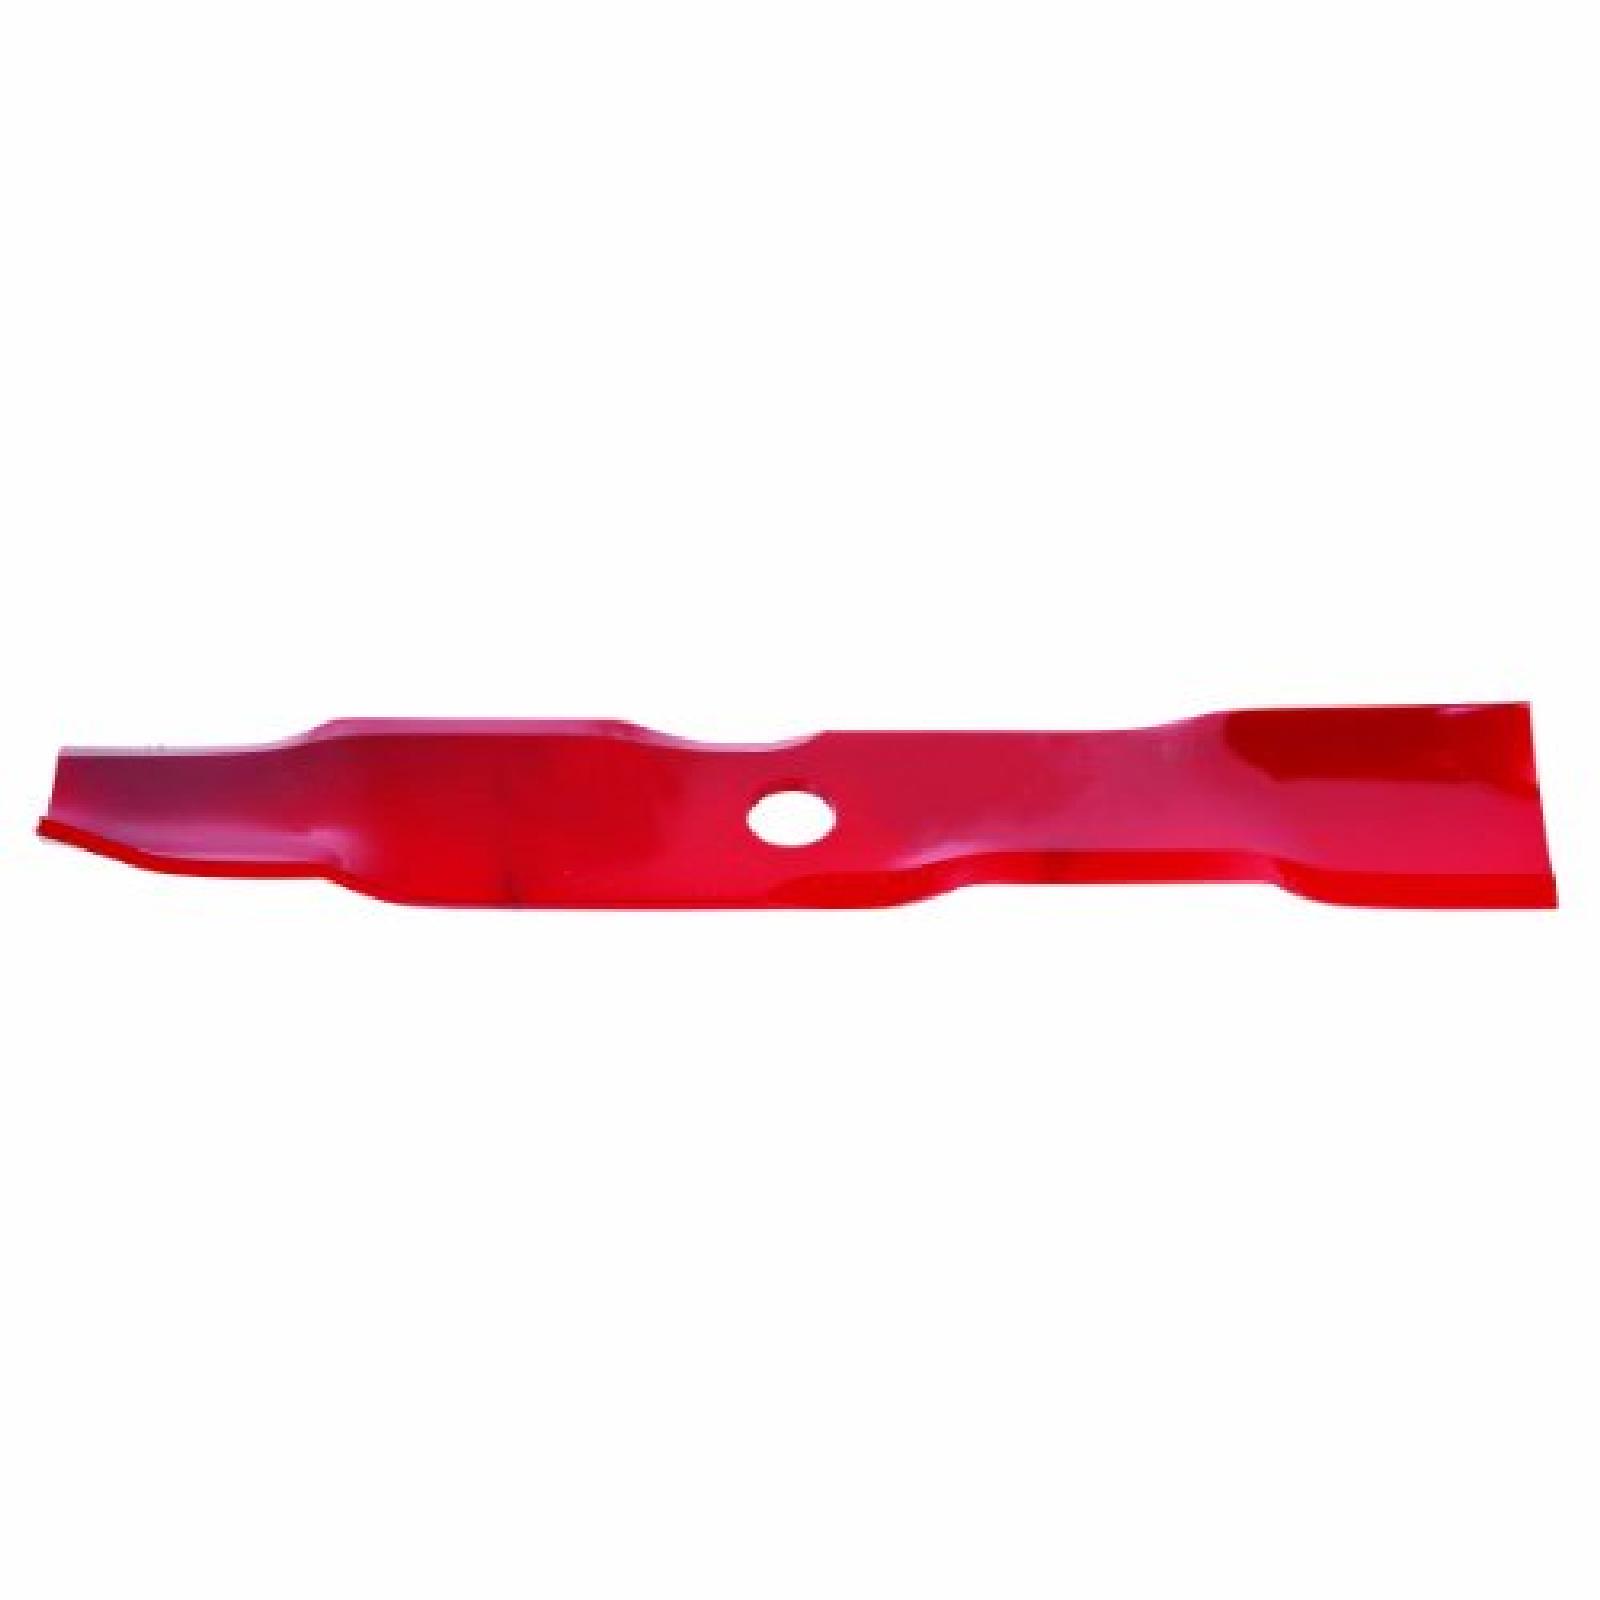 BLADE , EXMARK, 16 1/4IN part# 92-026 by Oregon